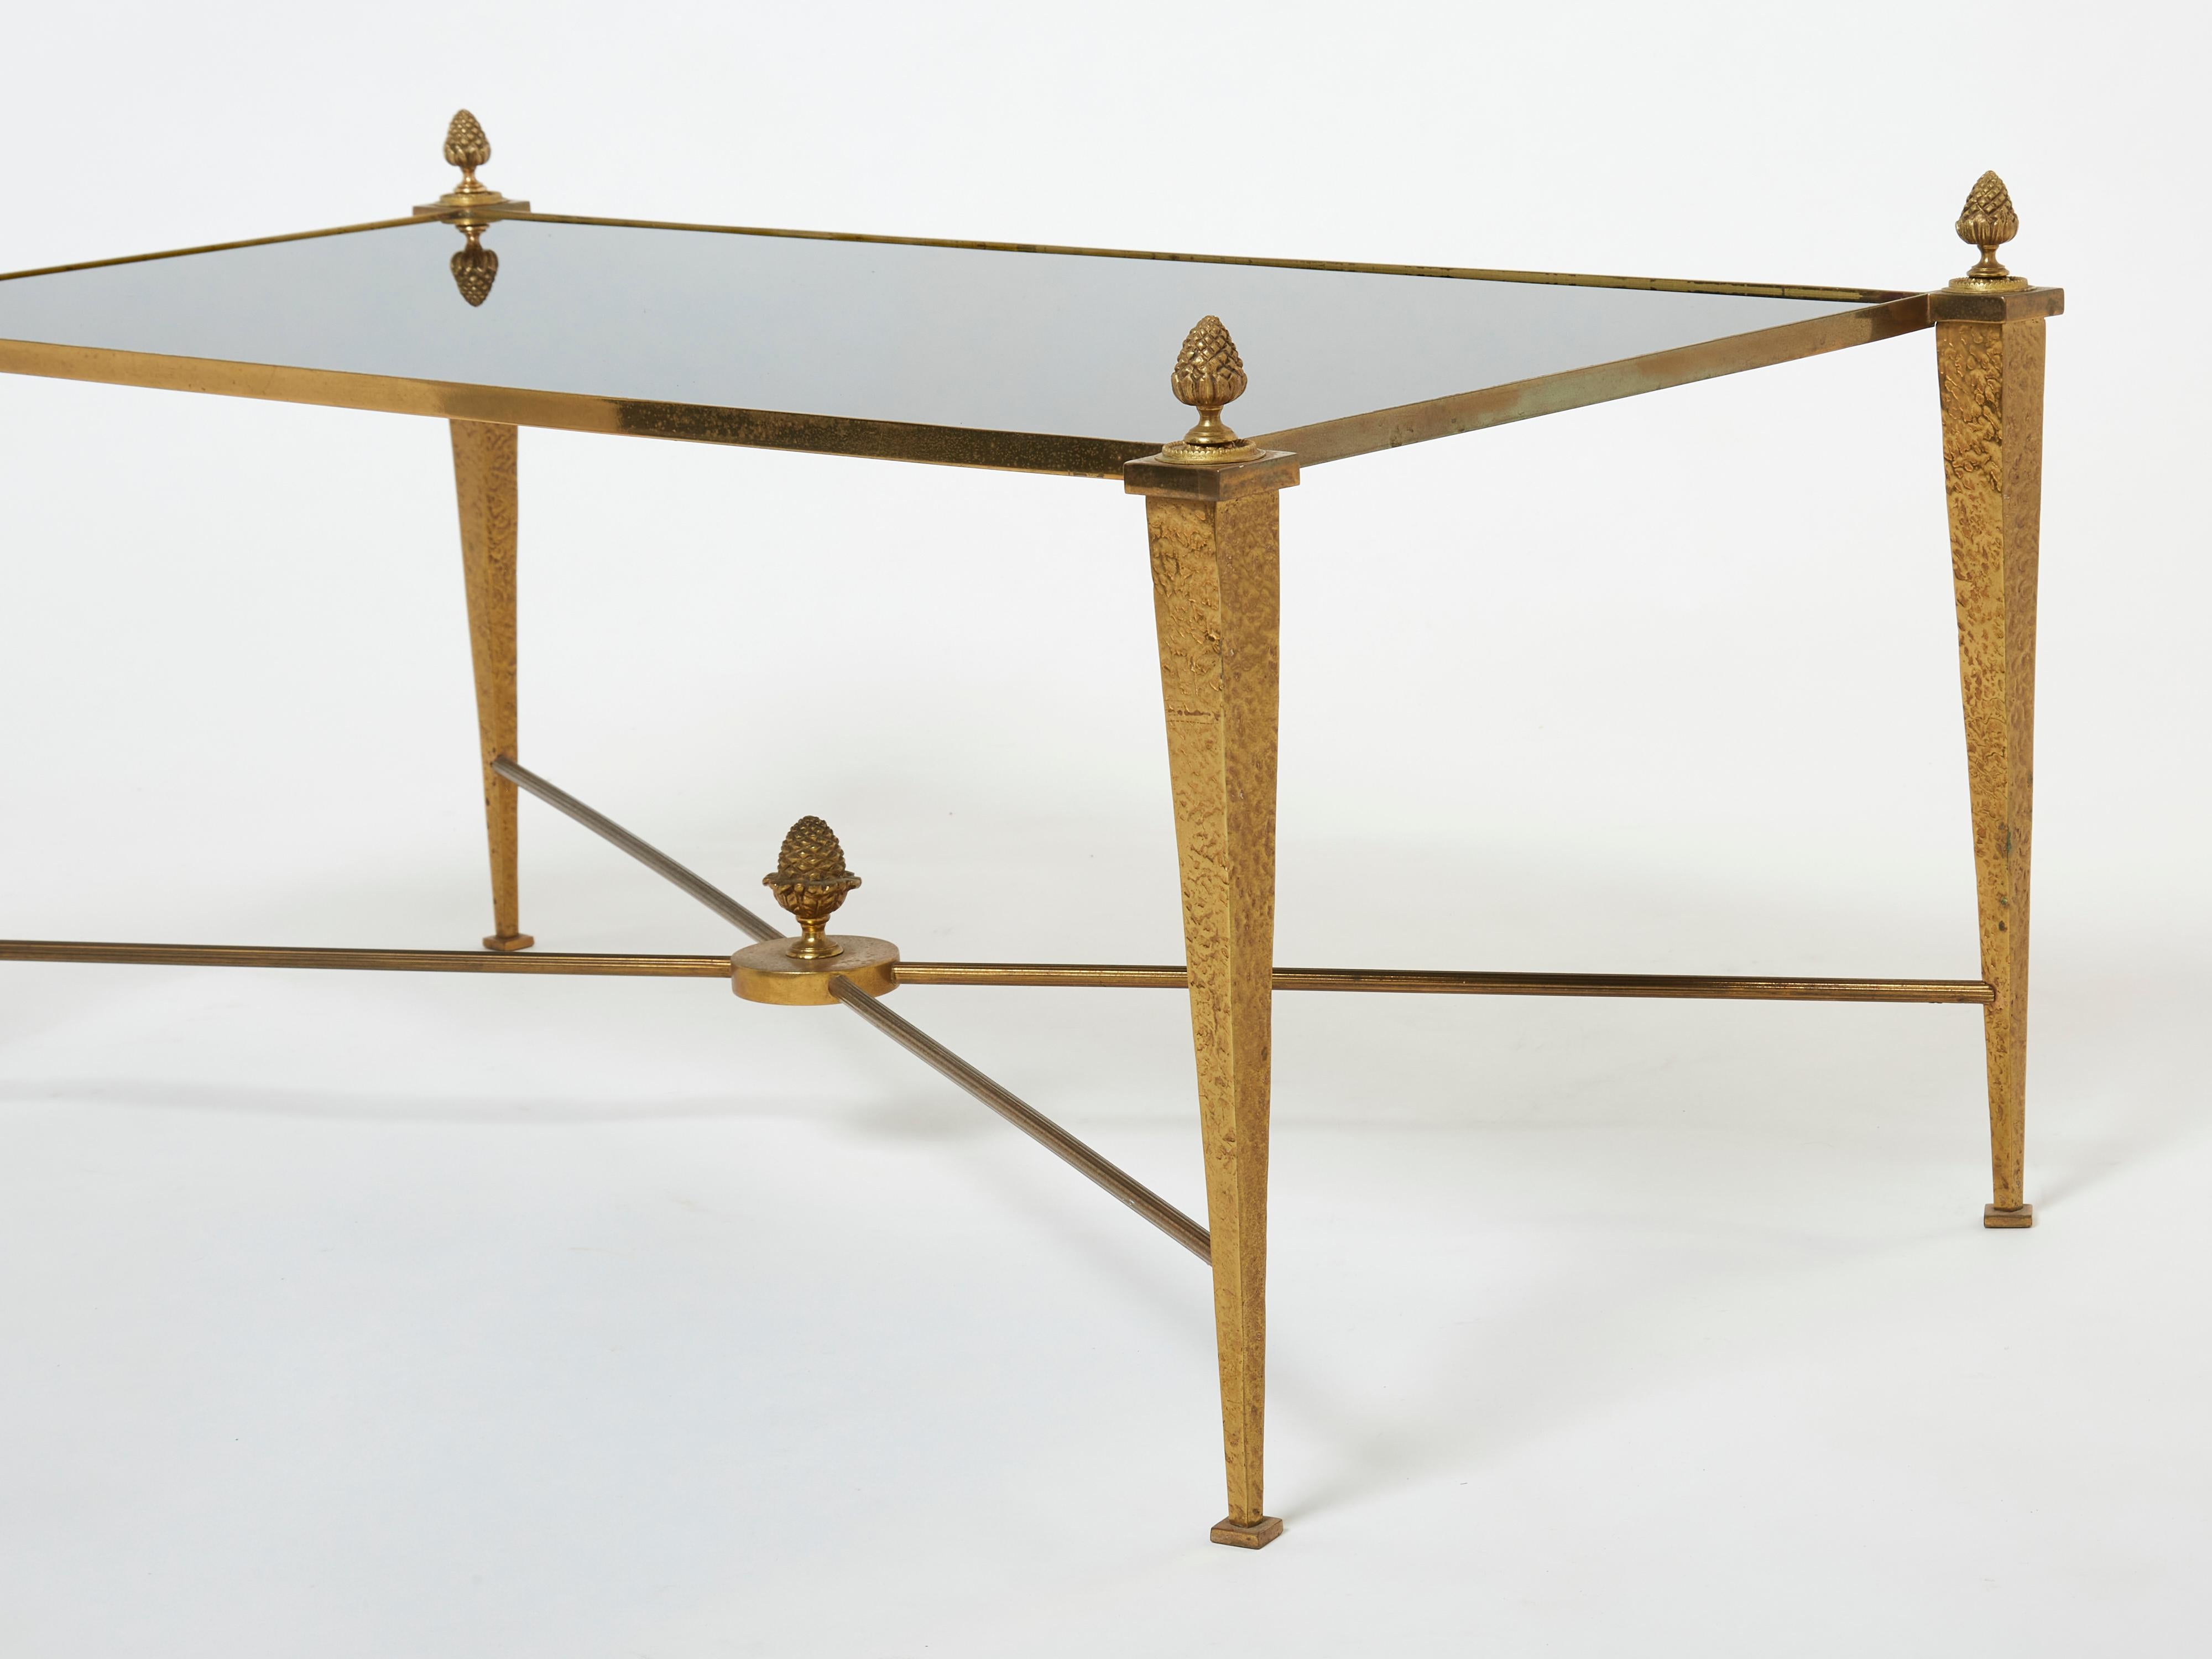 French Maison Ramsay Gilded Wrought Iron Opaline Coffee Table, 1960s For Sale 1